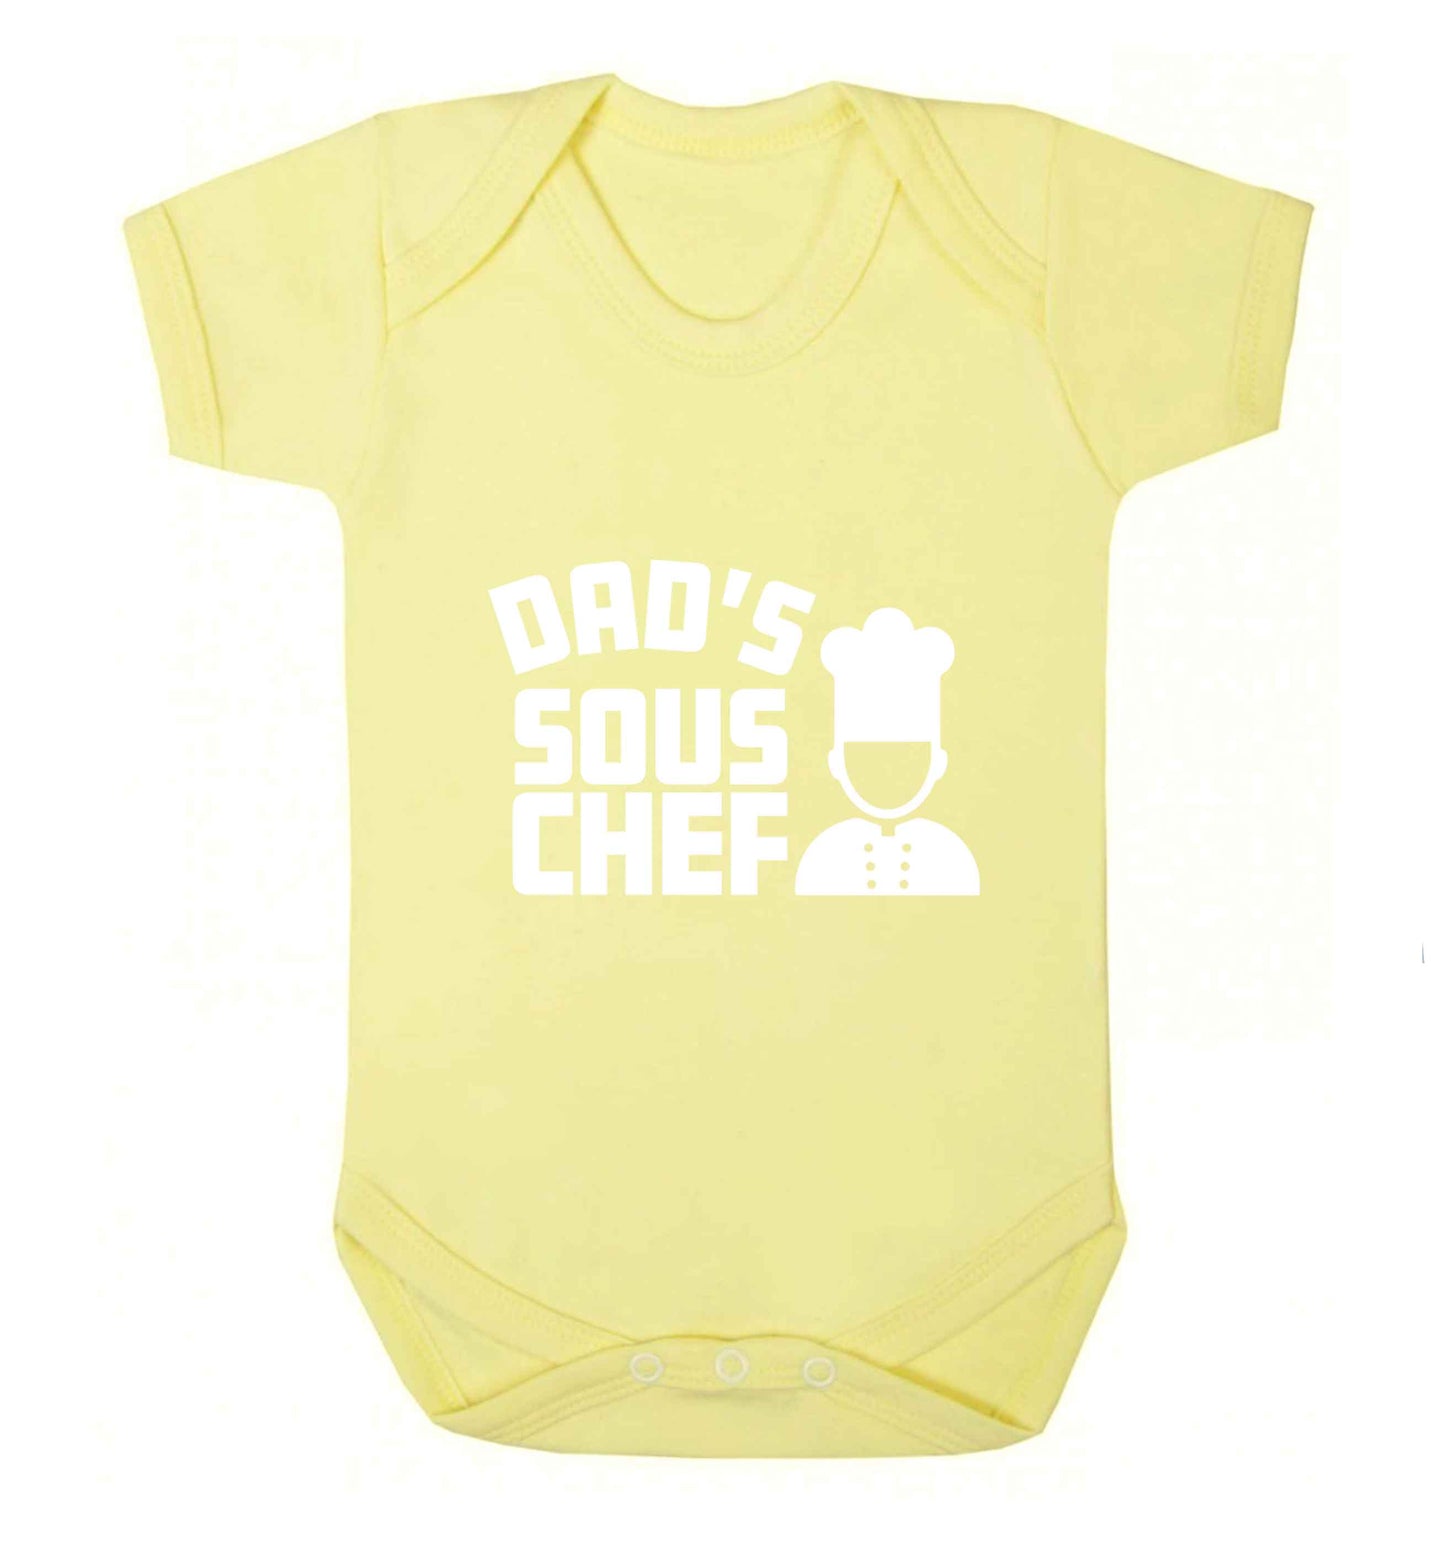 Dad's sous chef baby vest pale yellow 18-24 months